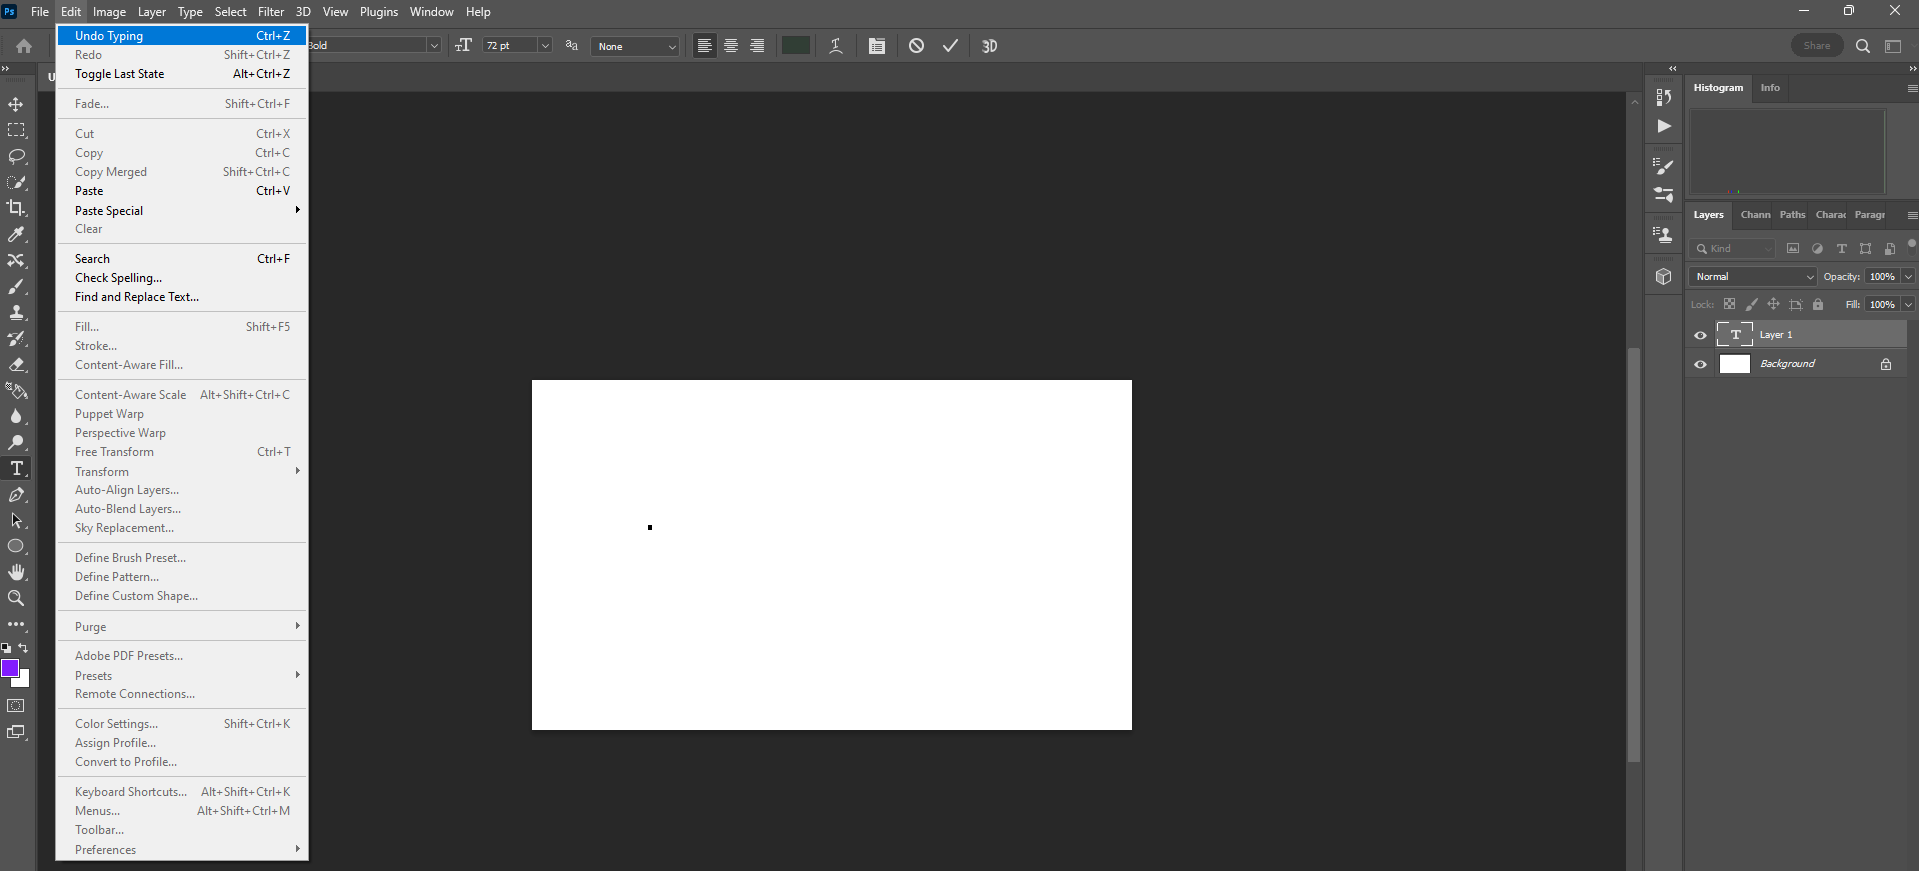 How to undo in Photoshop